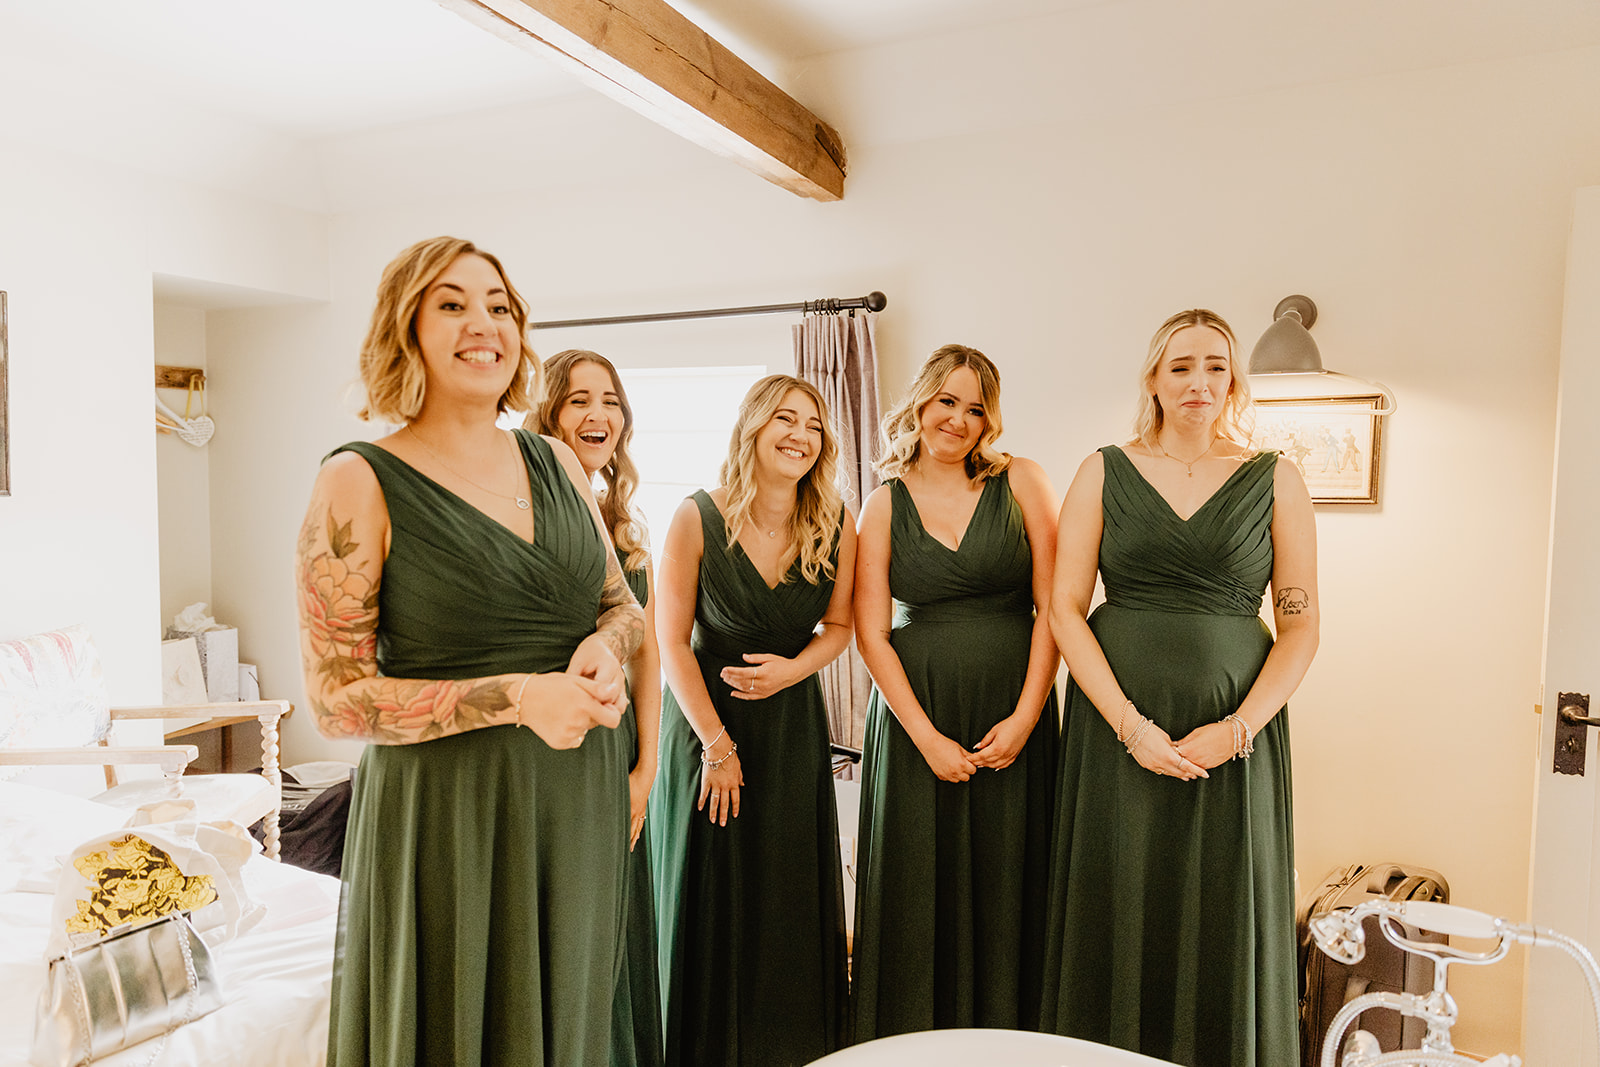 Bride and her bridesmaids getting ready at a Bury Manor Barn Wedding in Sussex. Photographer OliveJoy Photography.